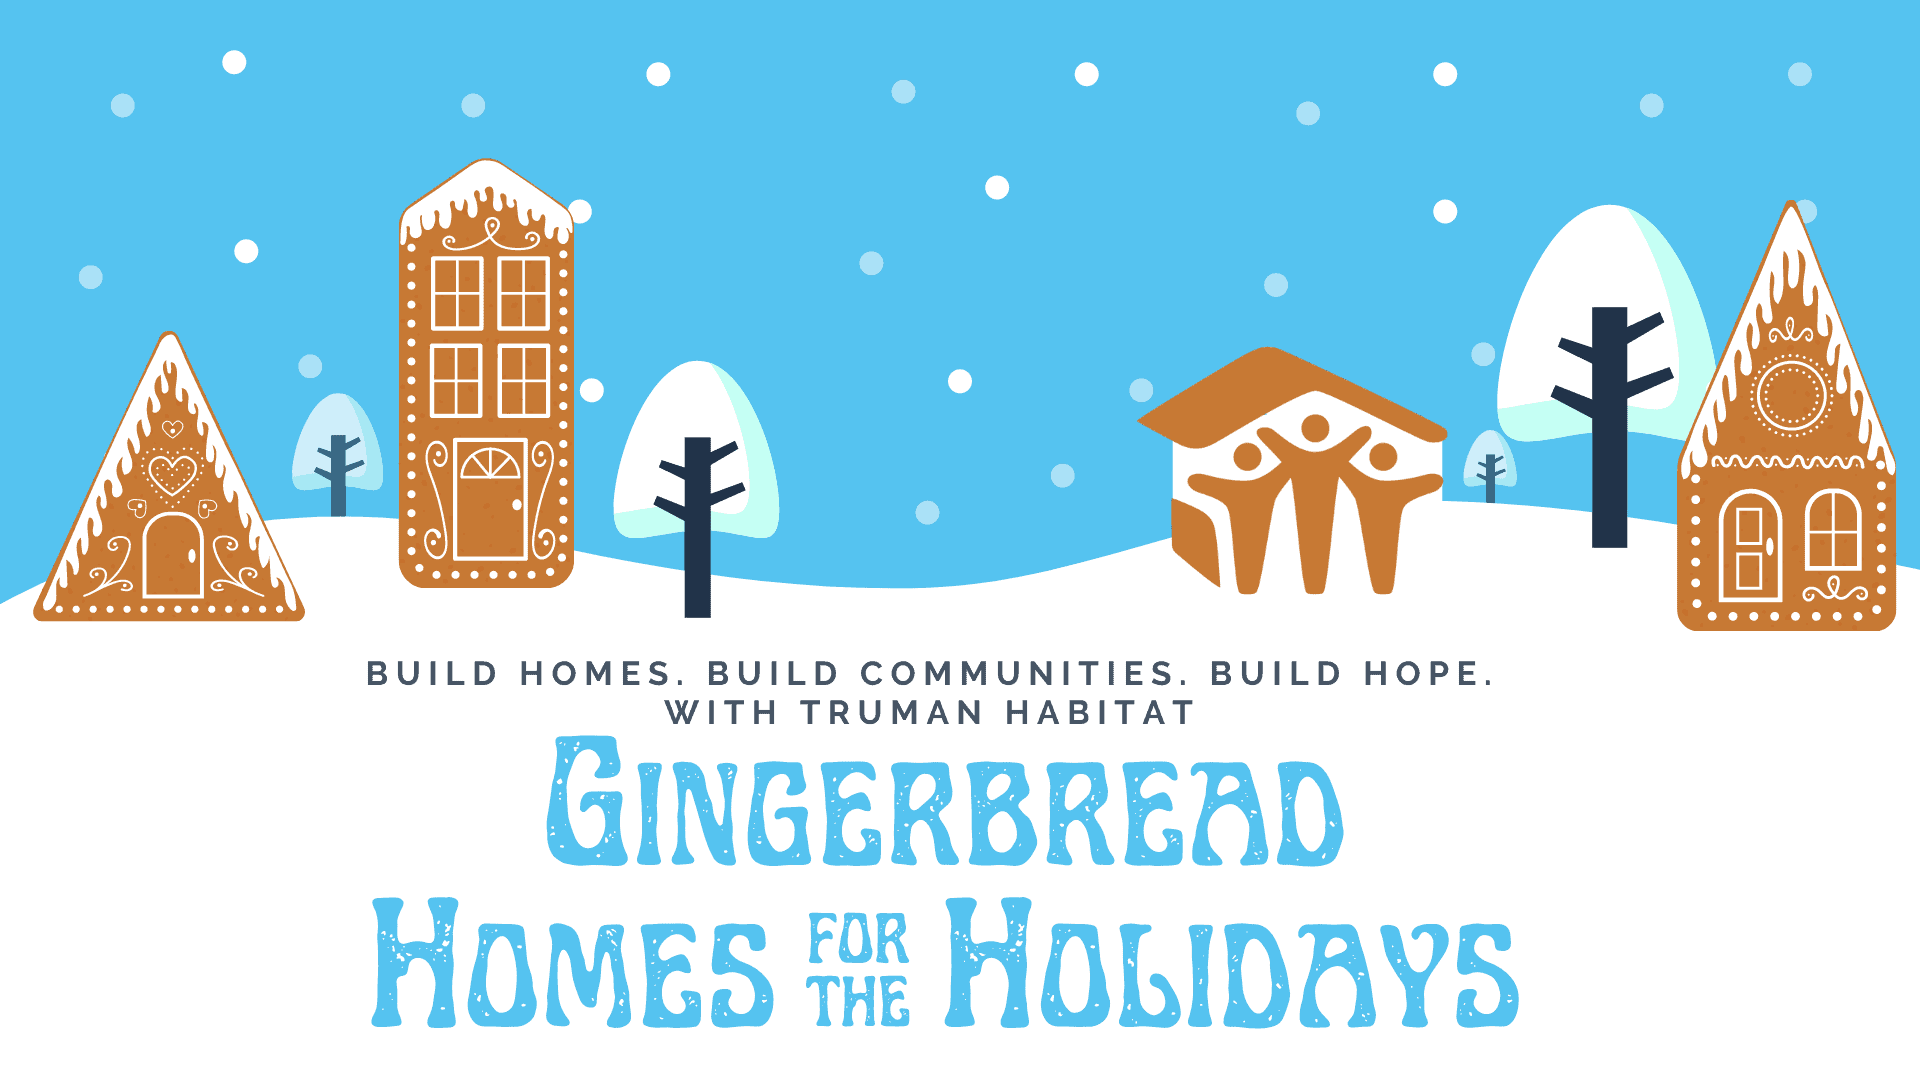 Gingerbread Homes for the Holidays